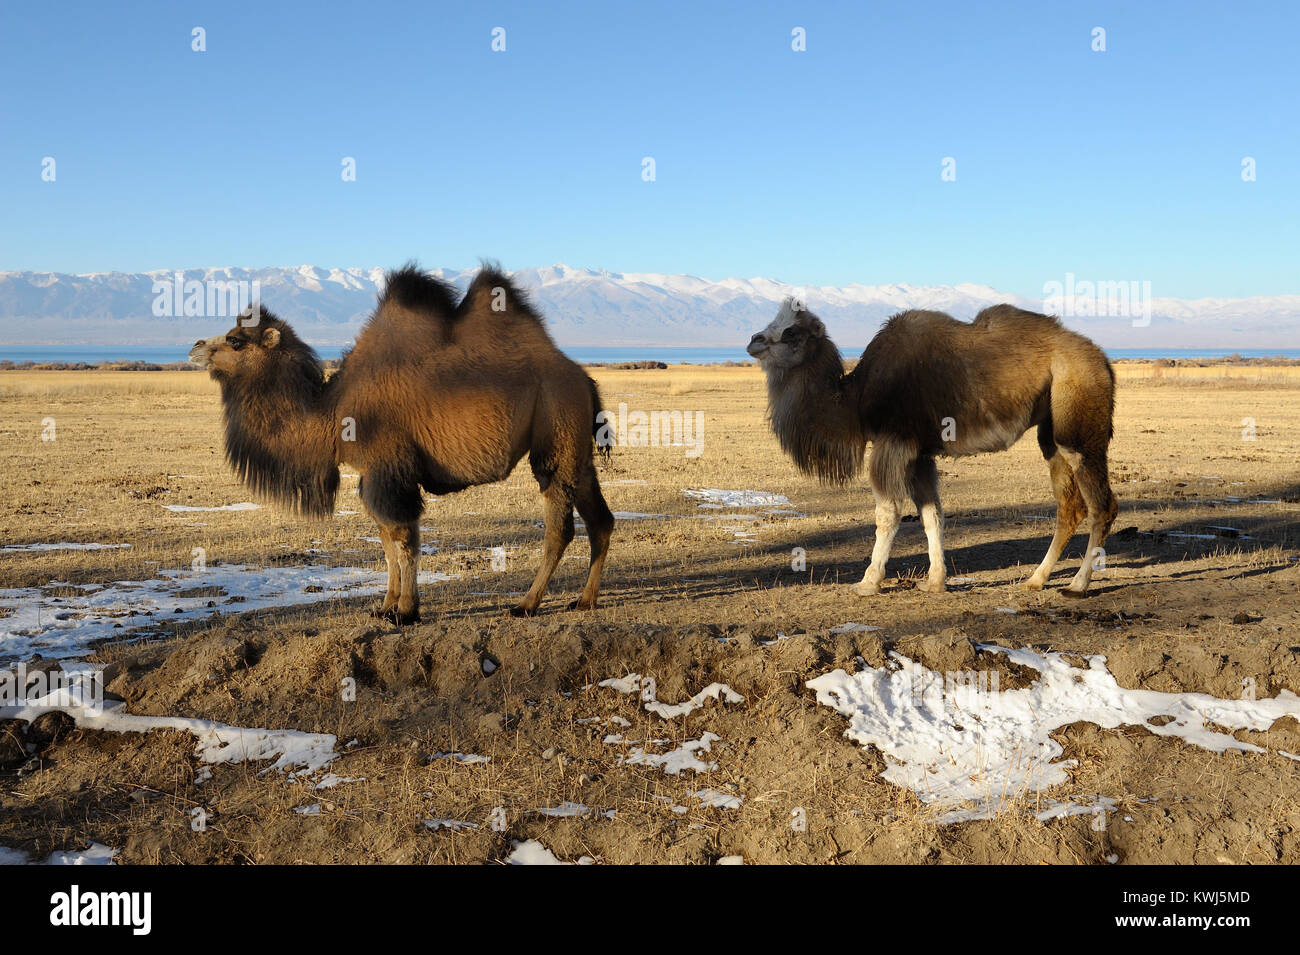 Two domestic bactrian camel's in Kyrgyzstan. Stock Photo